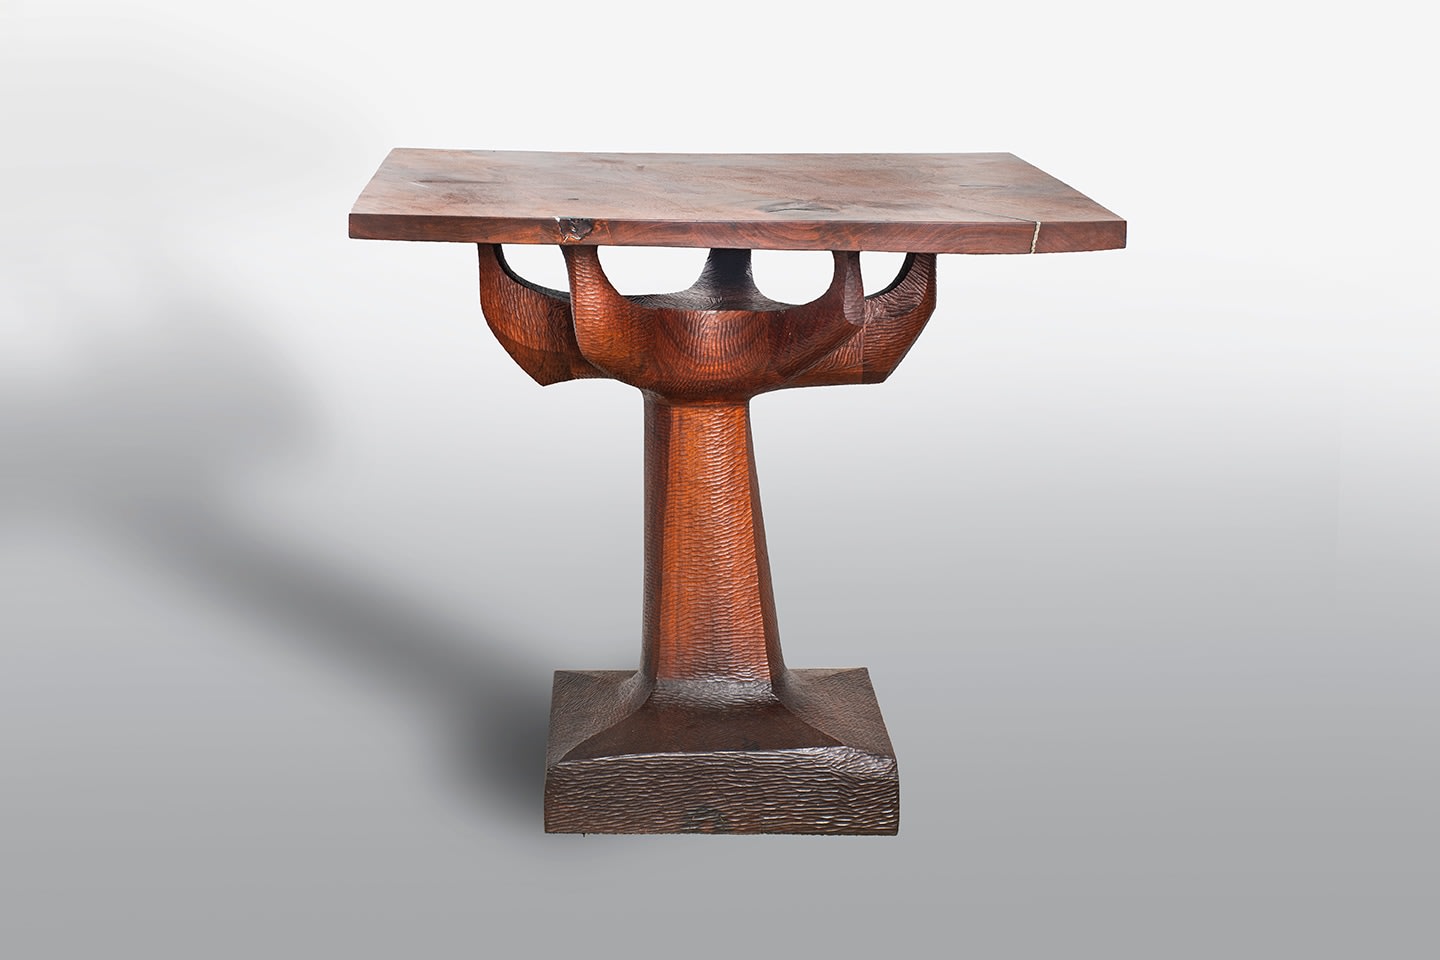 an early walnut table by Wendell Castle, the base formed by several thick blocks of wood which have been joined together and then chip carved to form a squared base from which a &quot;tree trunk&quot; styled stem rises and spreads to form five curved branches, which support a flat squared thick table top with areas of aluminum inset into the grain of the wood